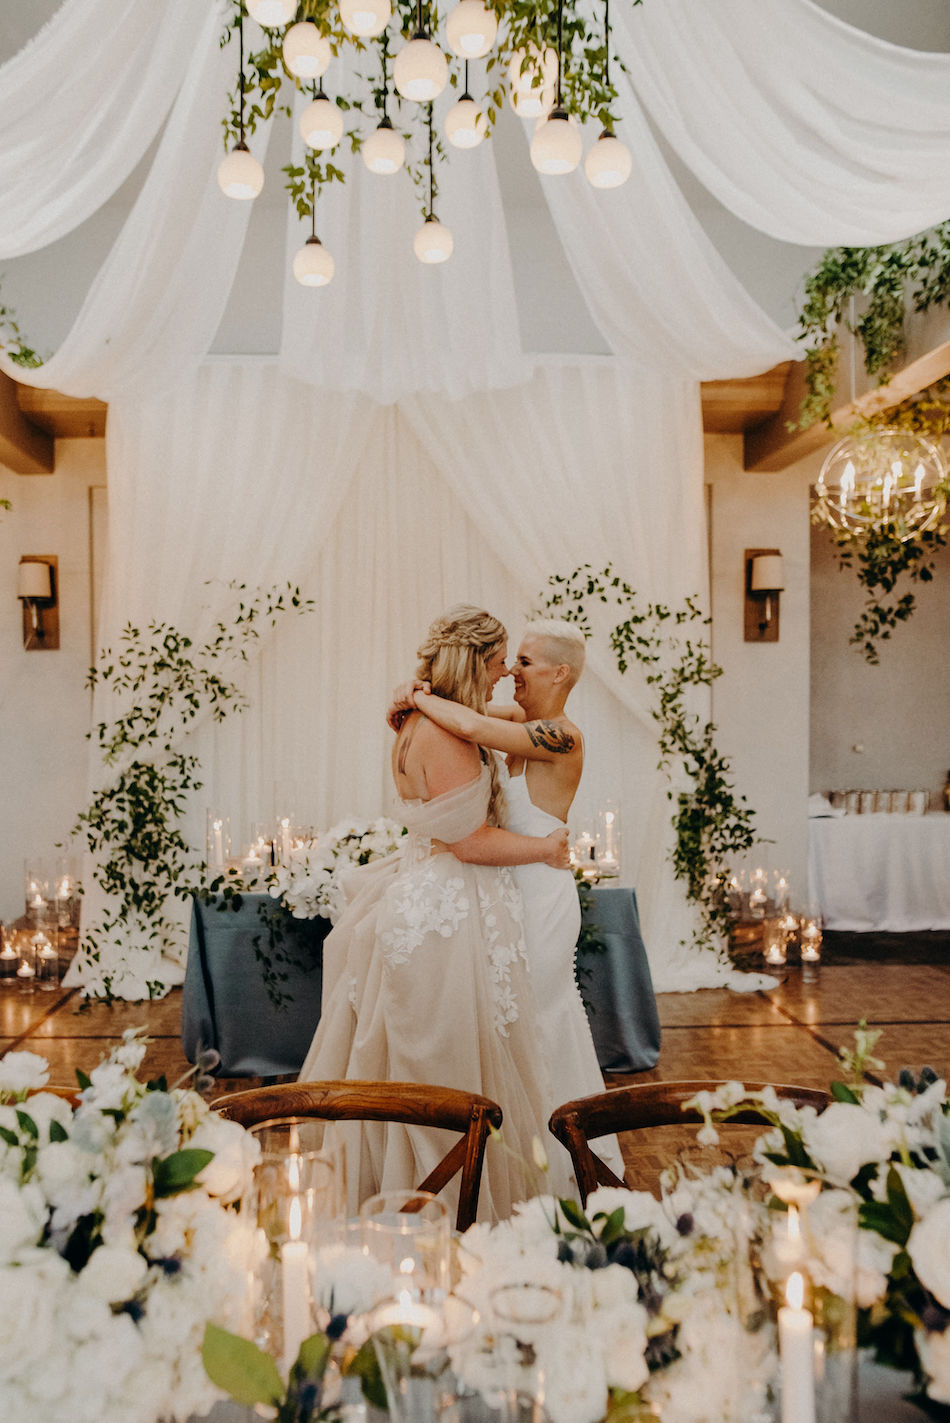 brides, first dance, just married, floral design, florist, wedding florist, wedding flowers, orange county weddings, orange county wedding florist, orange county florist, orange county floral design, flowers by cina